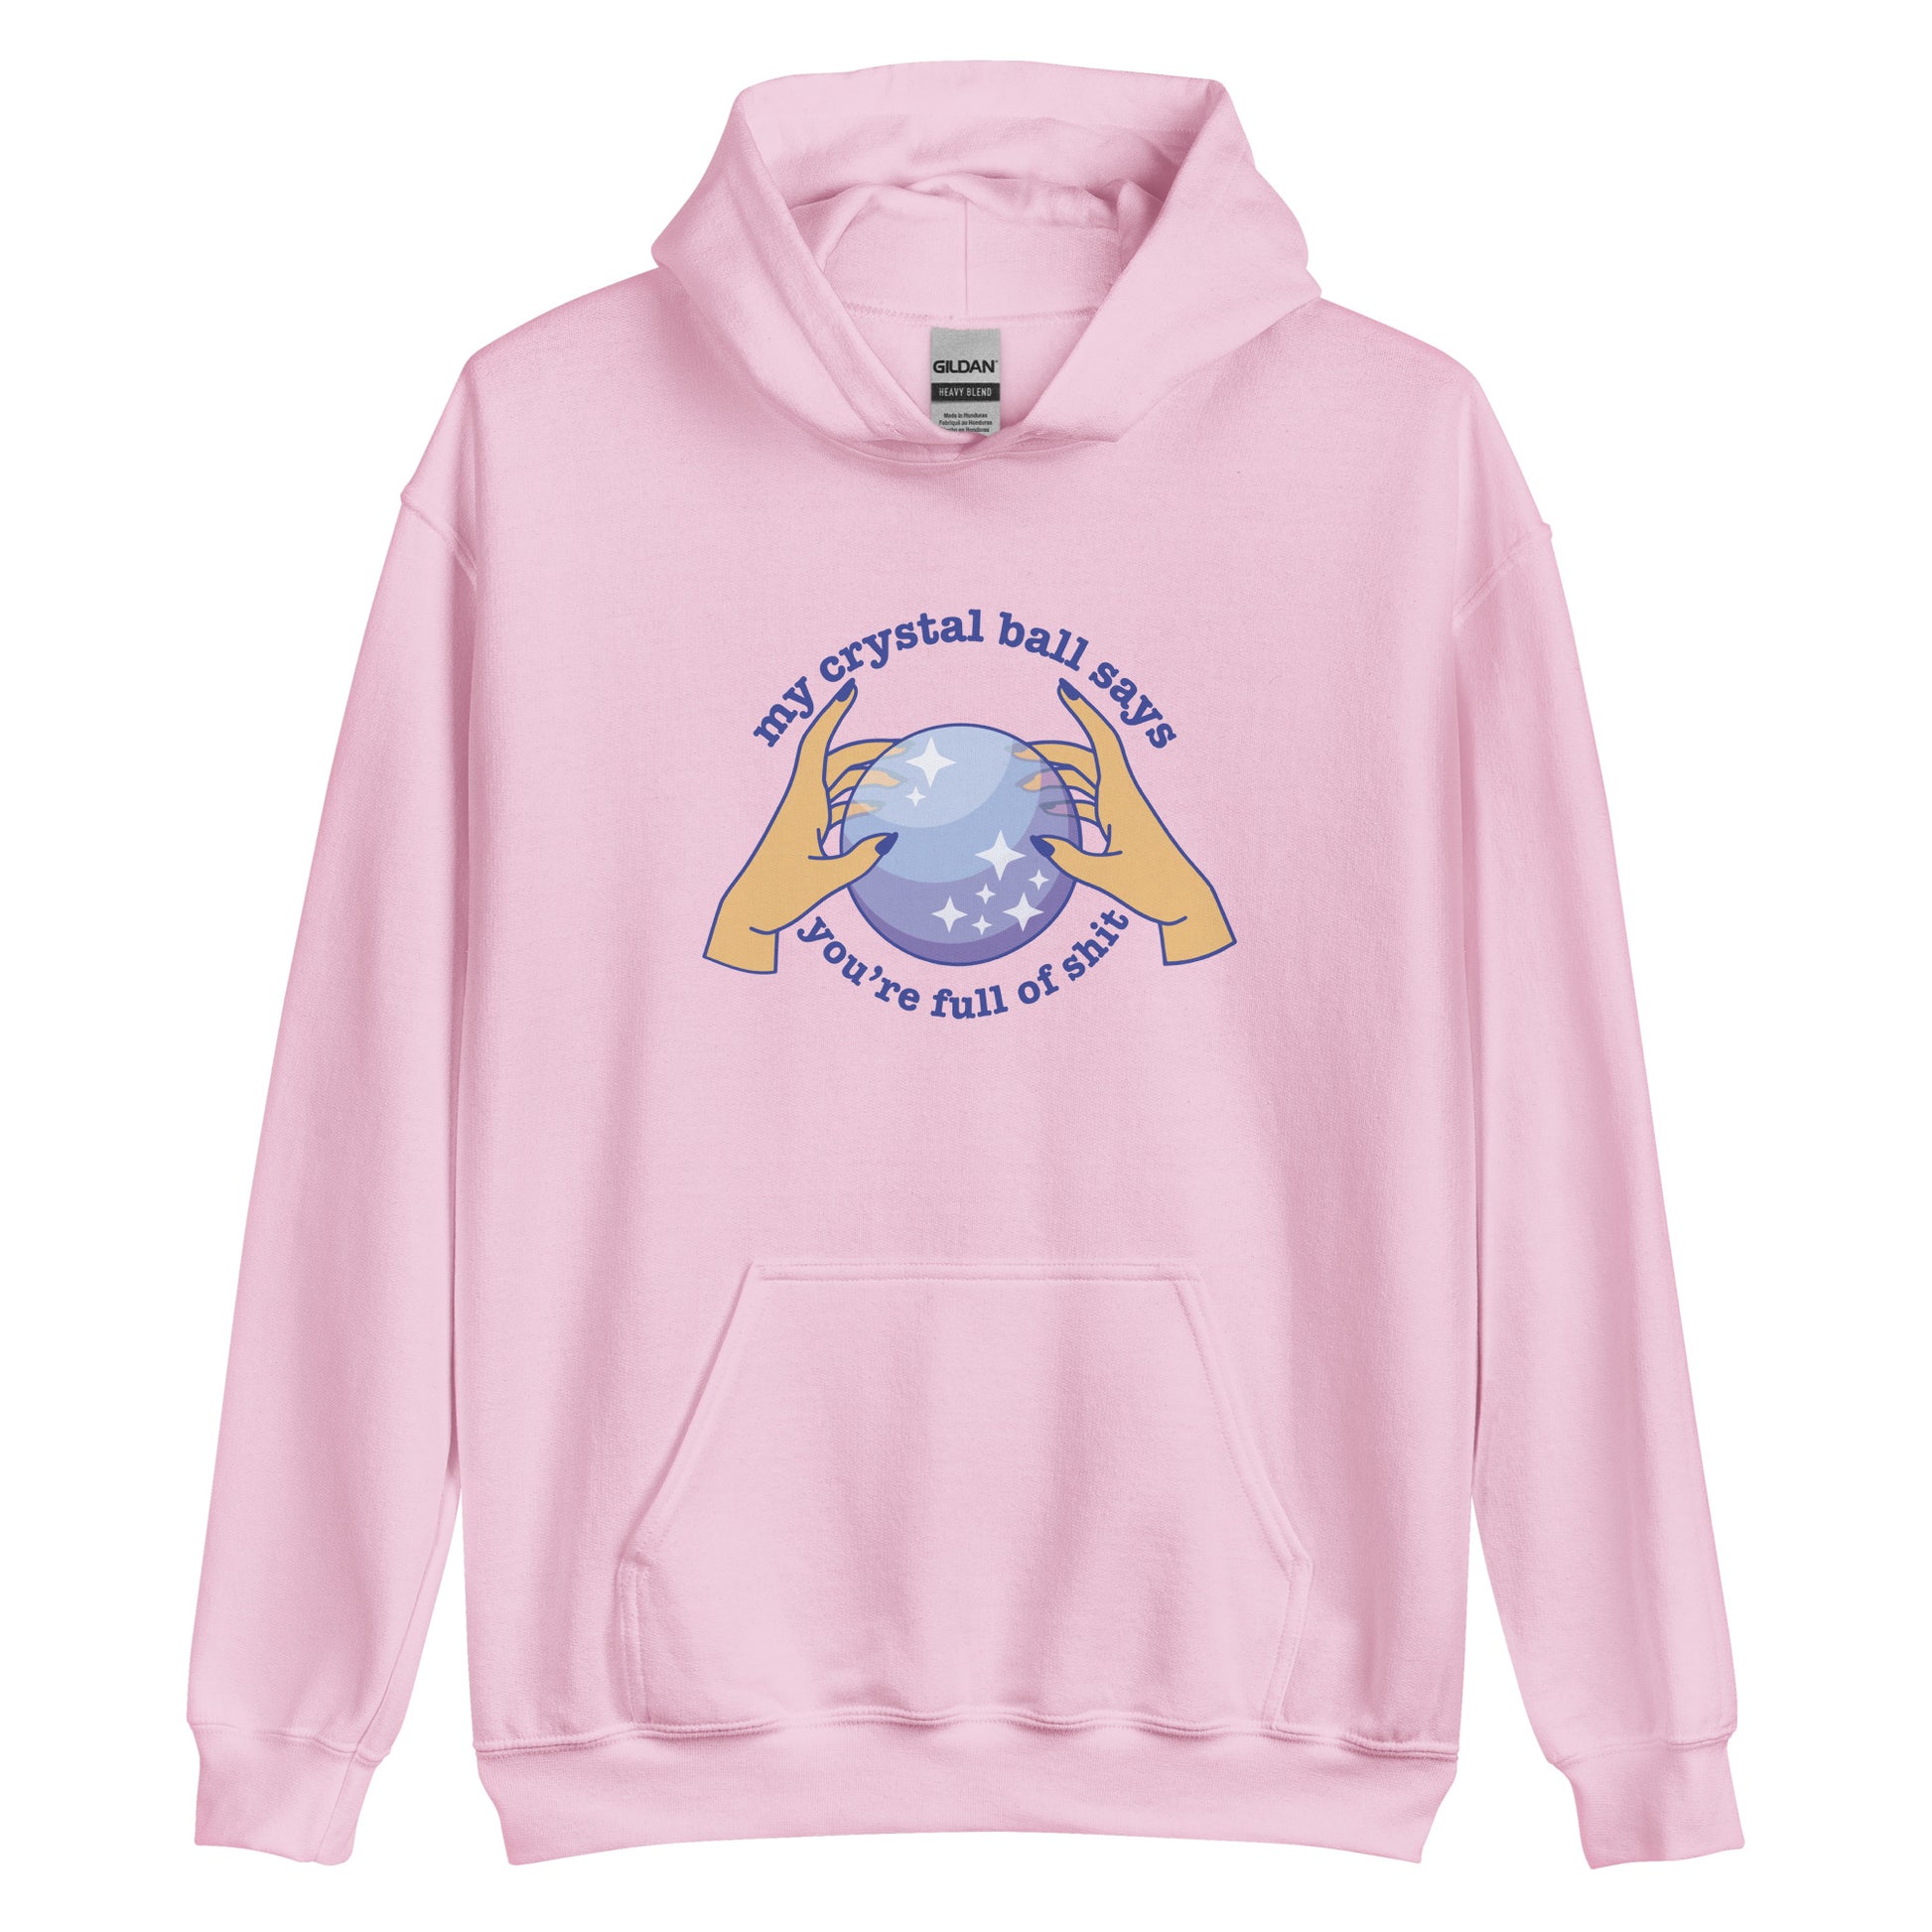 A light pink hoodie with a picture of hands on a crystal ball and text reading "My crystal ball says you're full of shit"